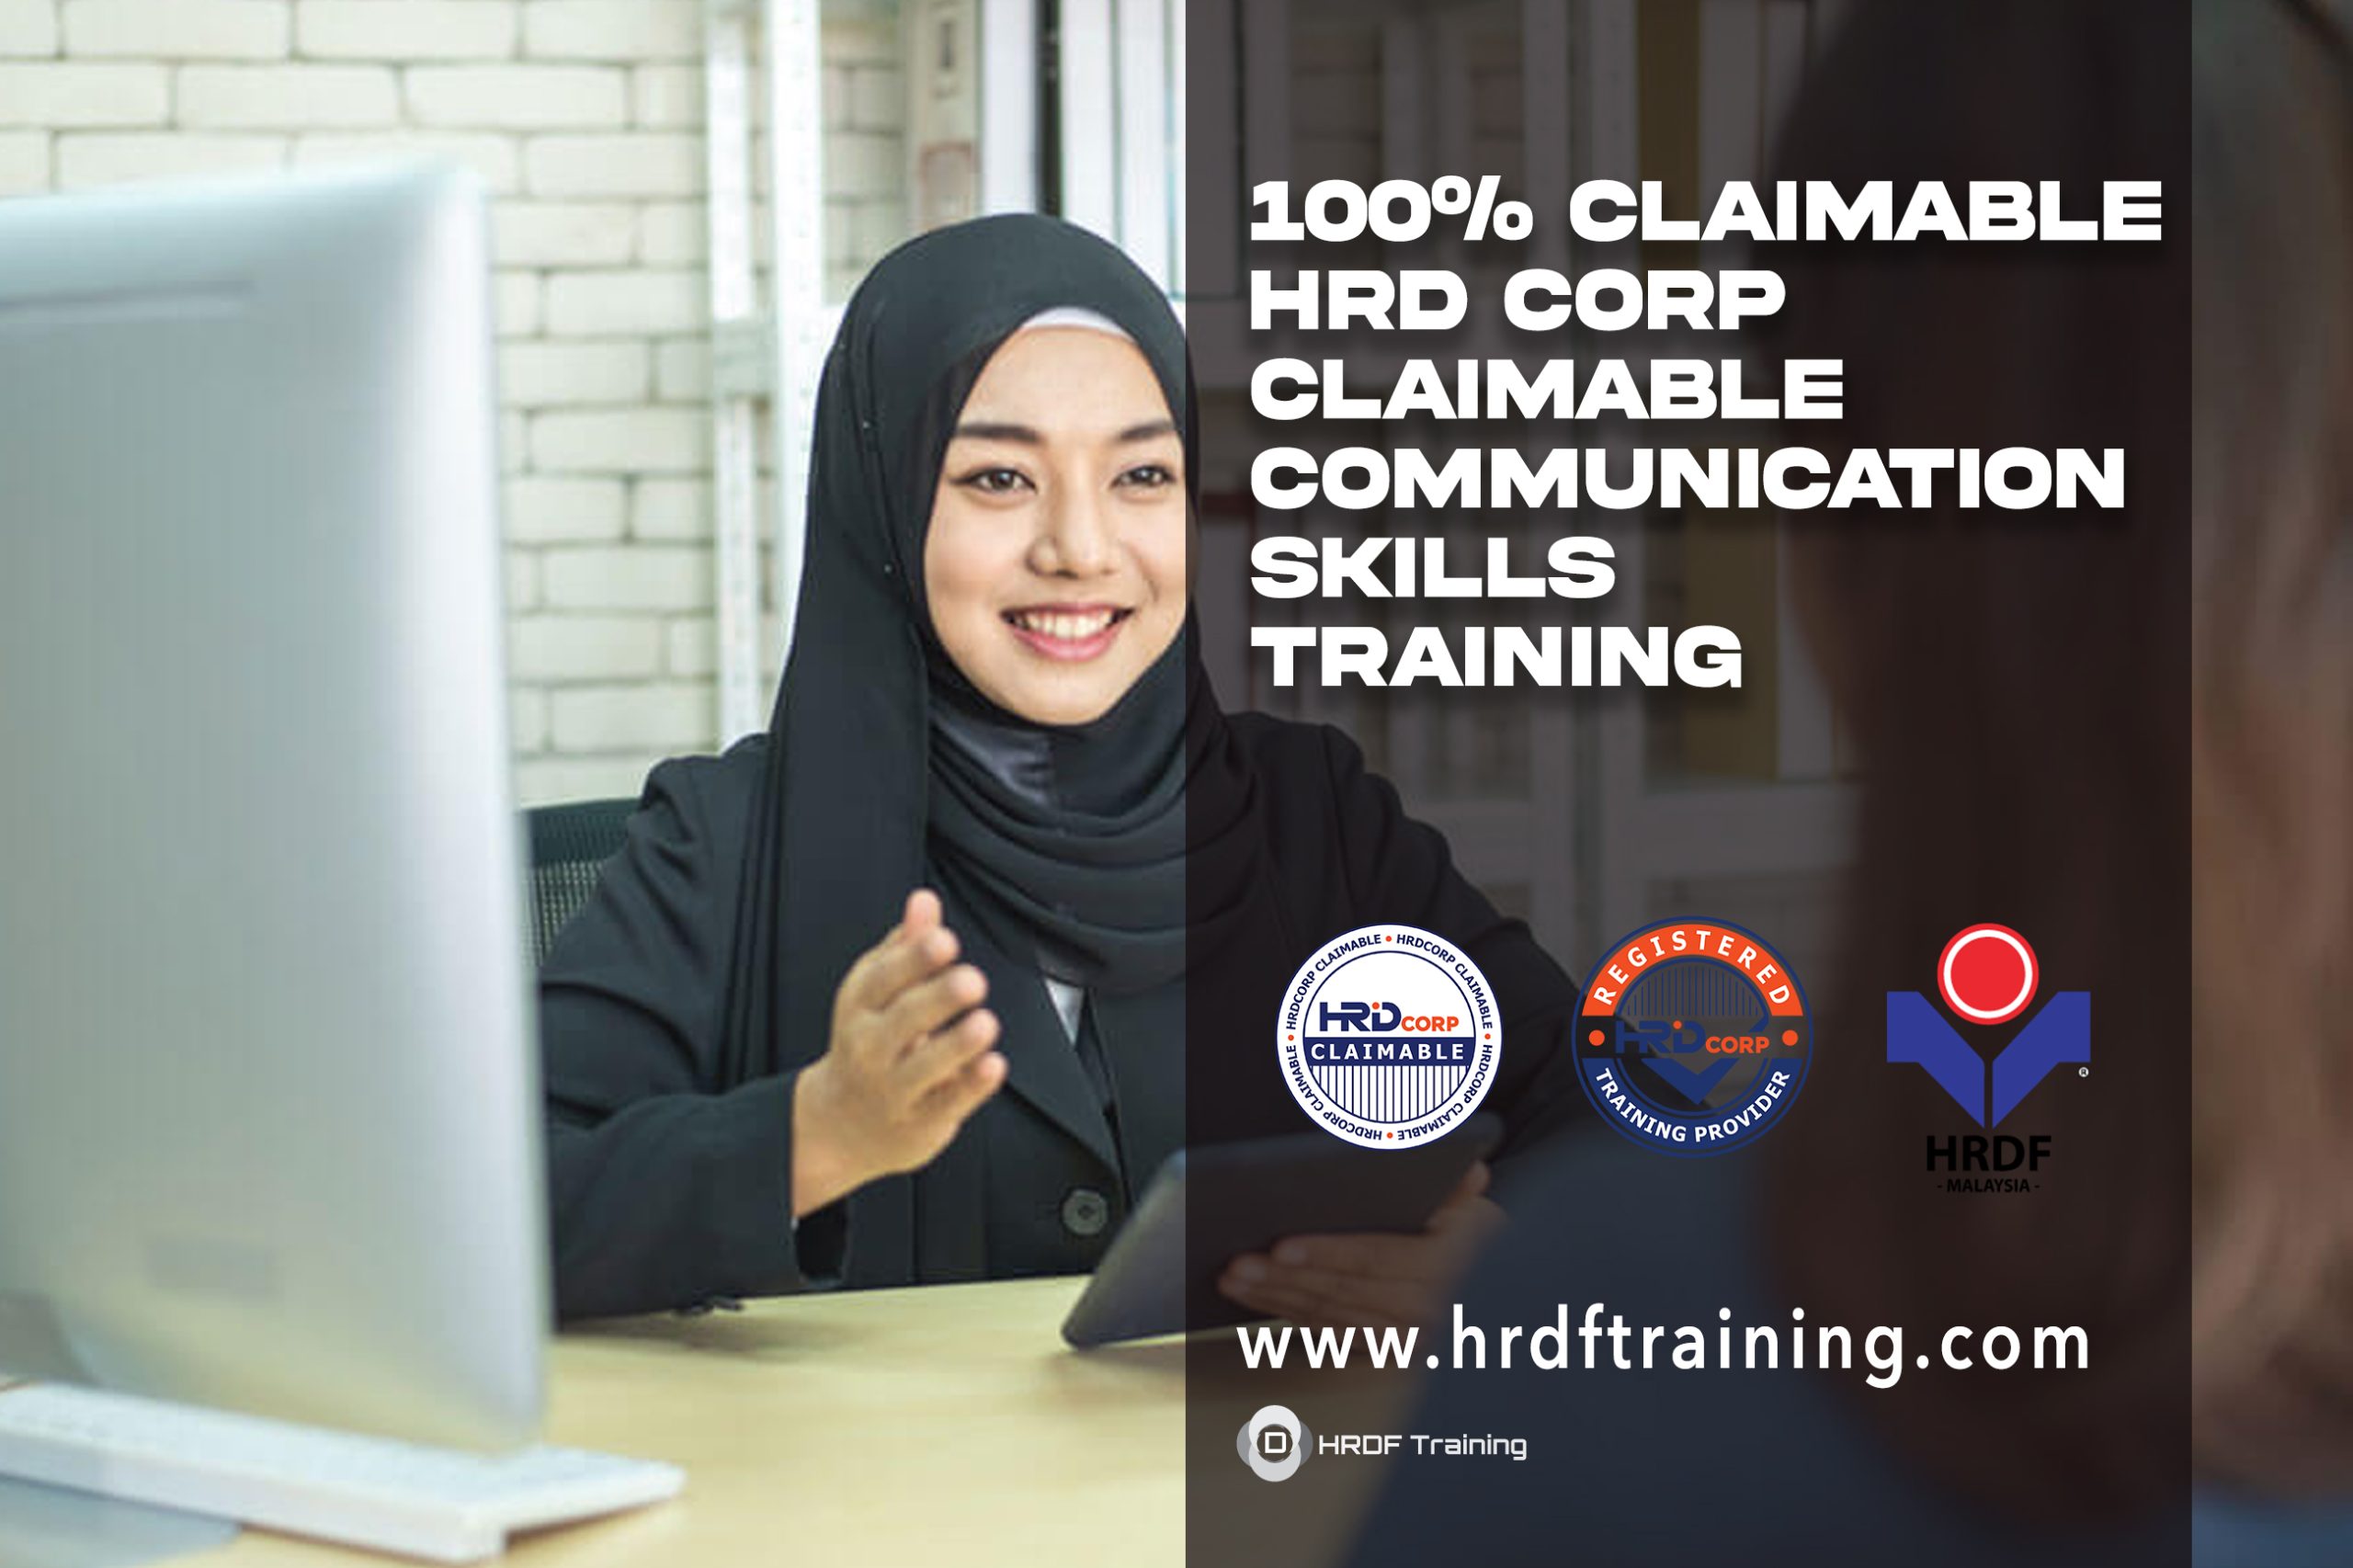 HRDF HRD Corp Claimable Communication Skills Training